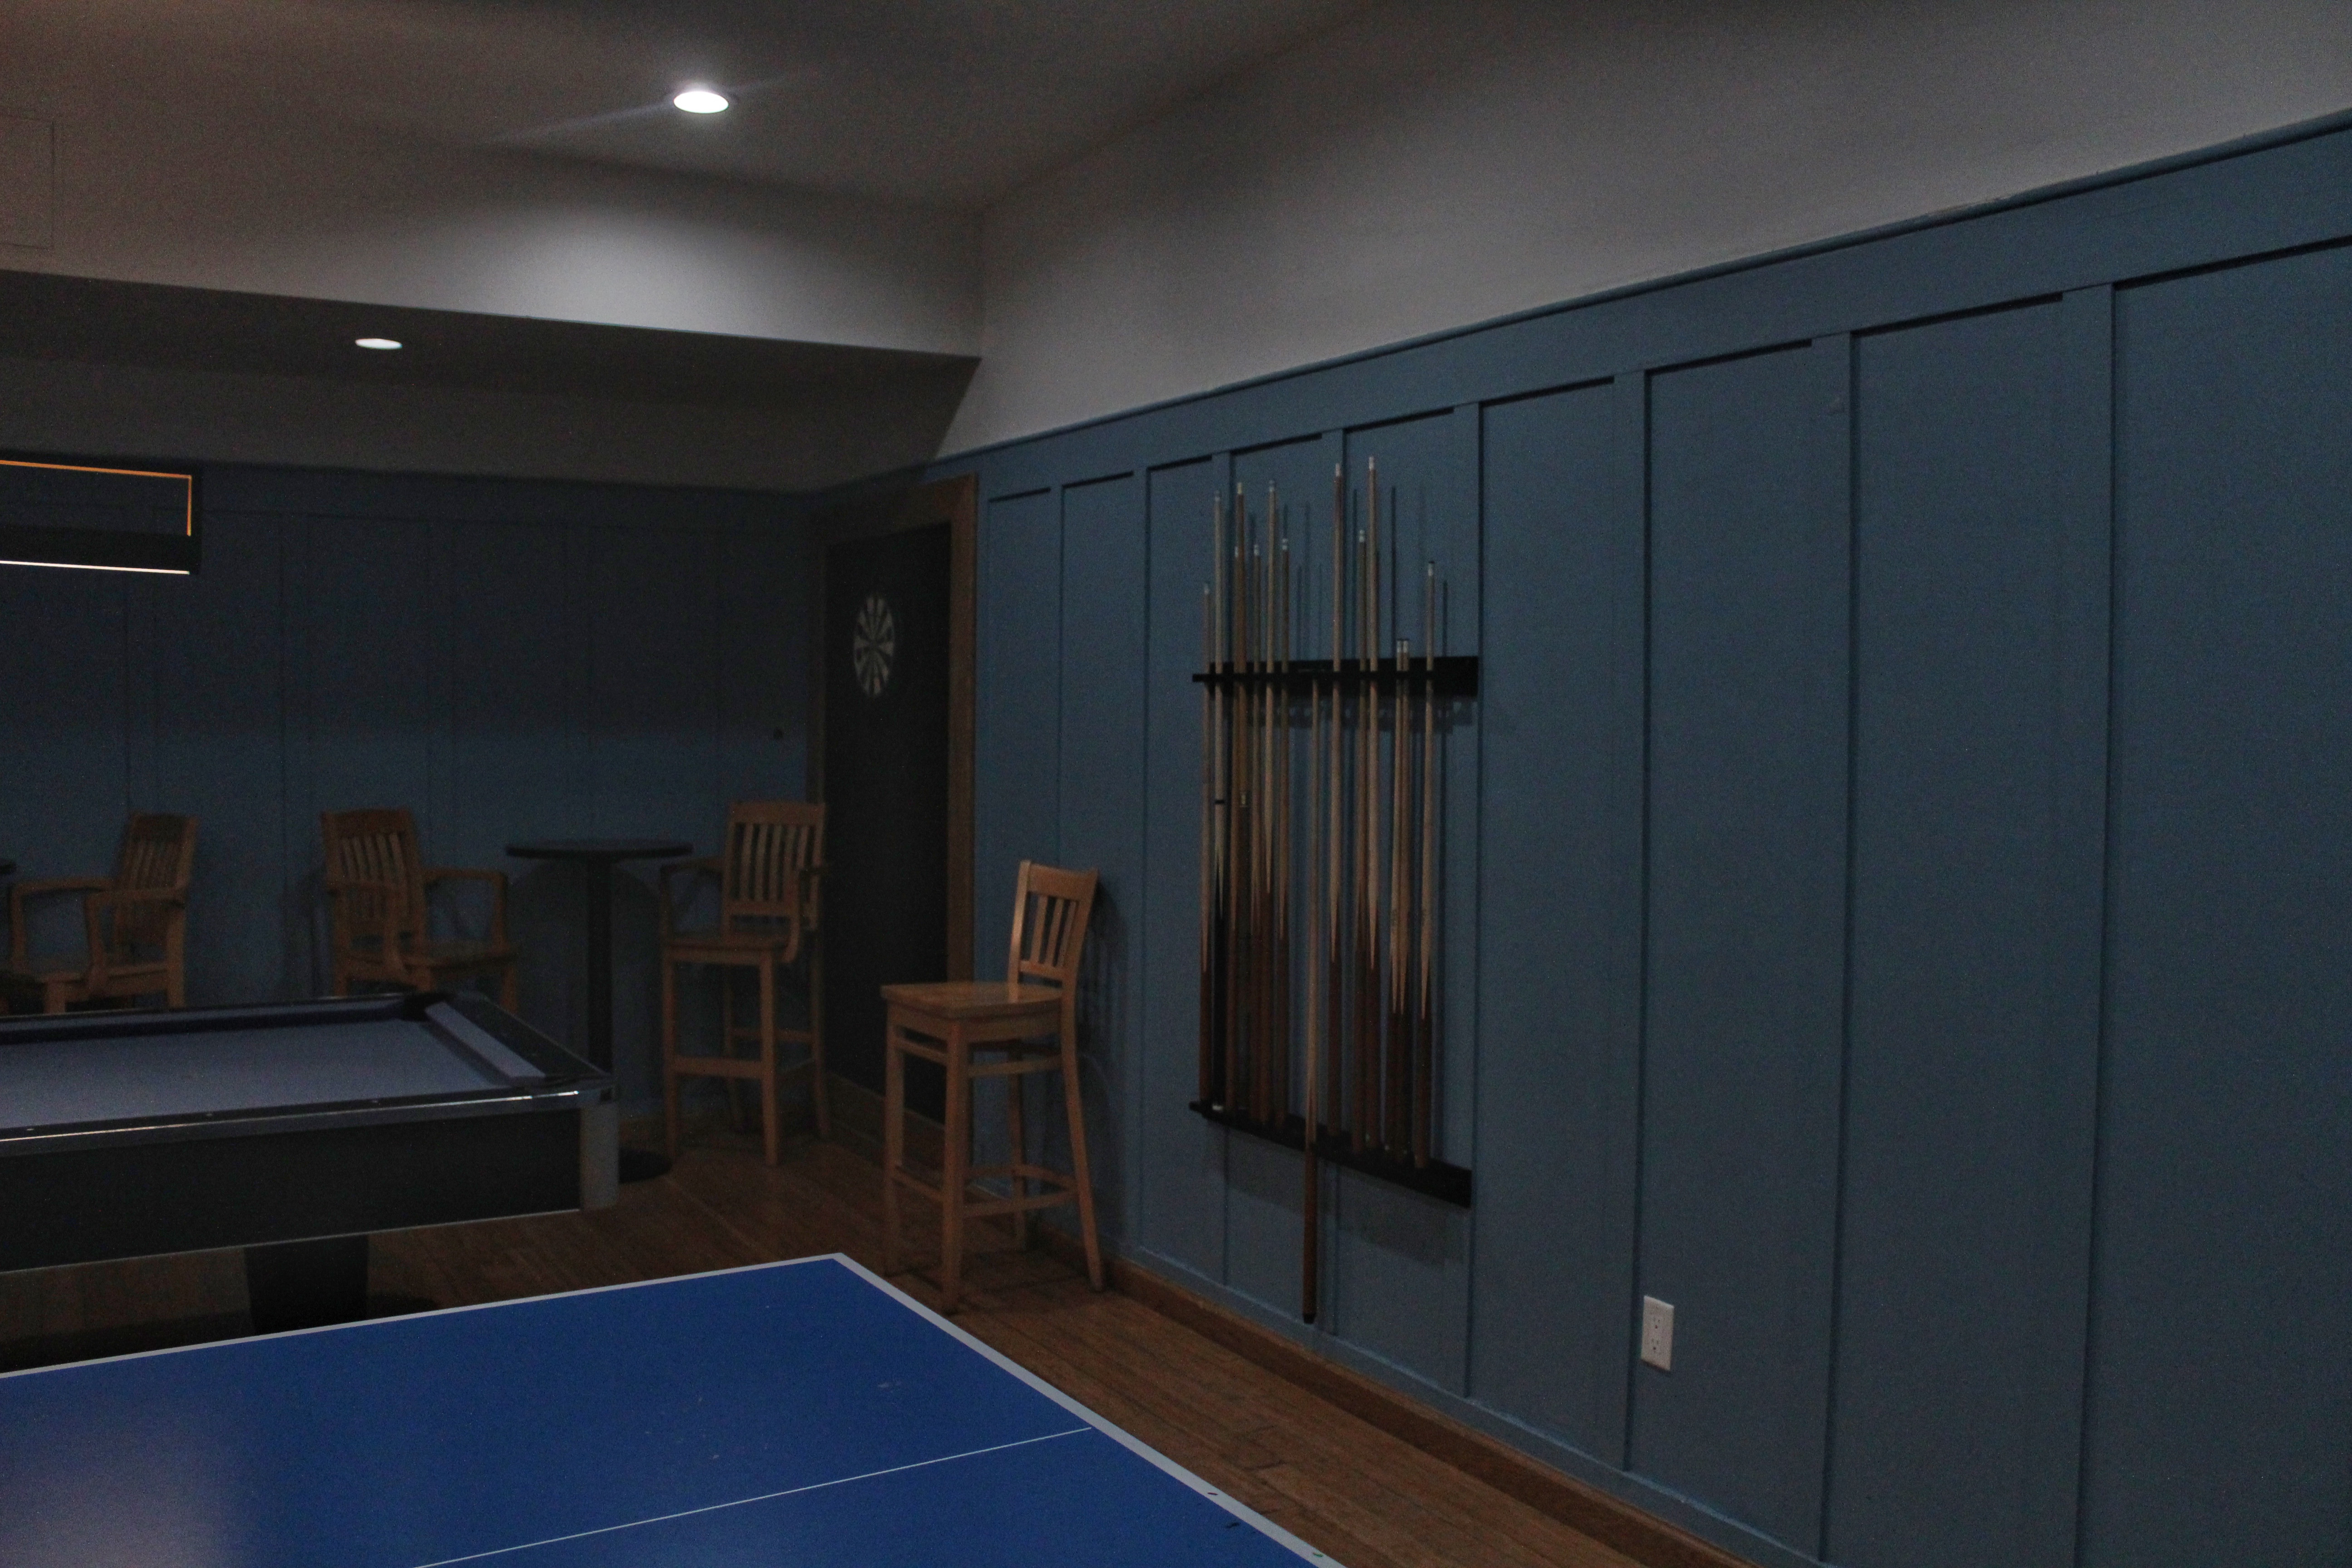 A game room with blue wood-panelled walls and pool equipment.